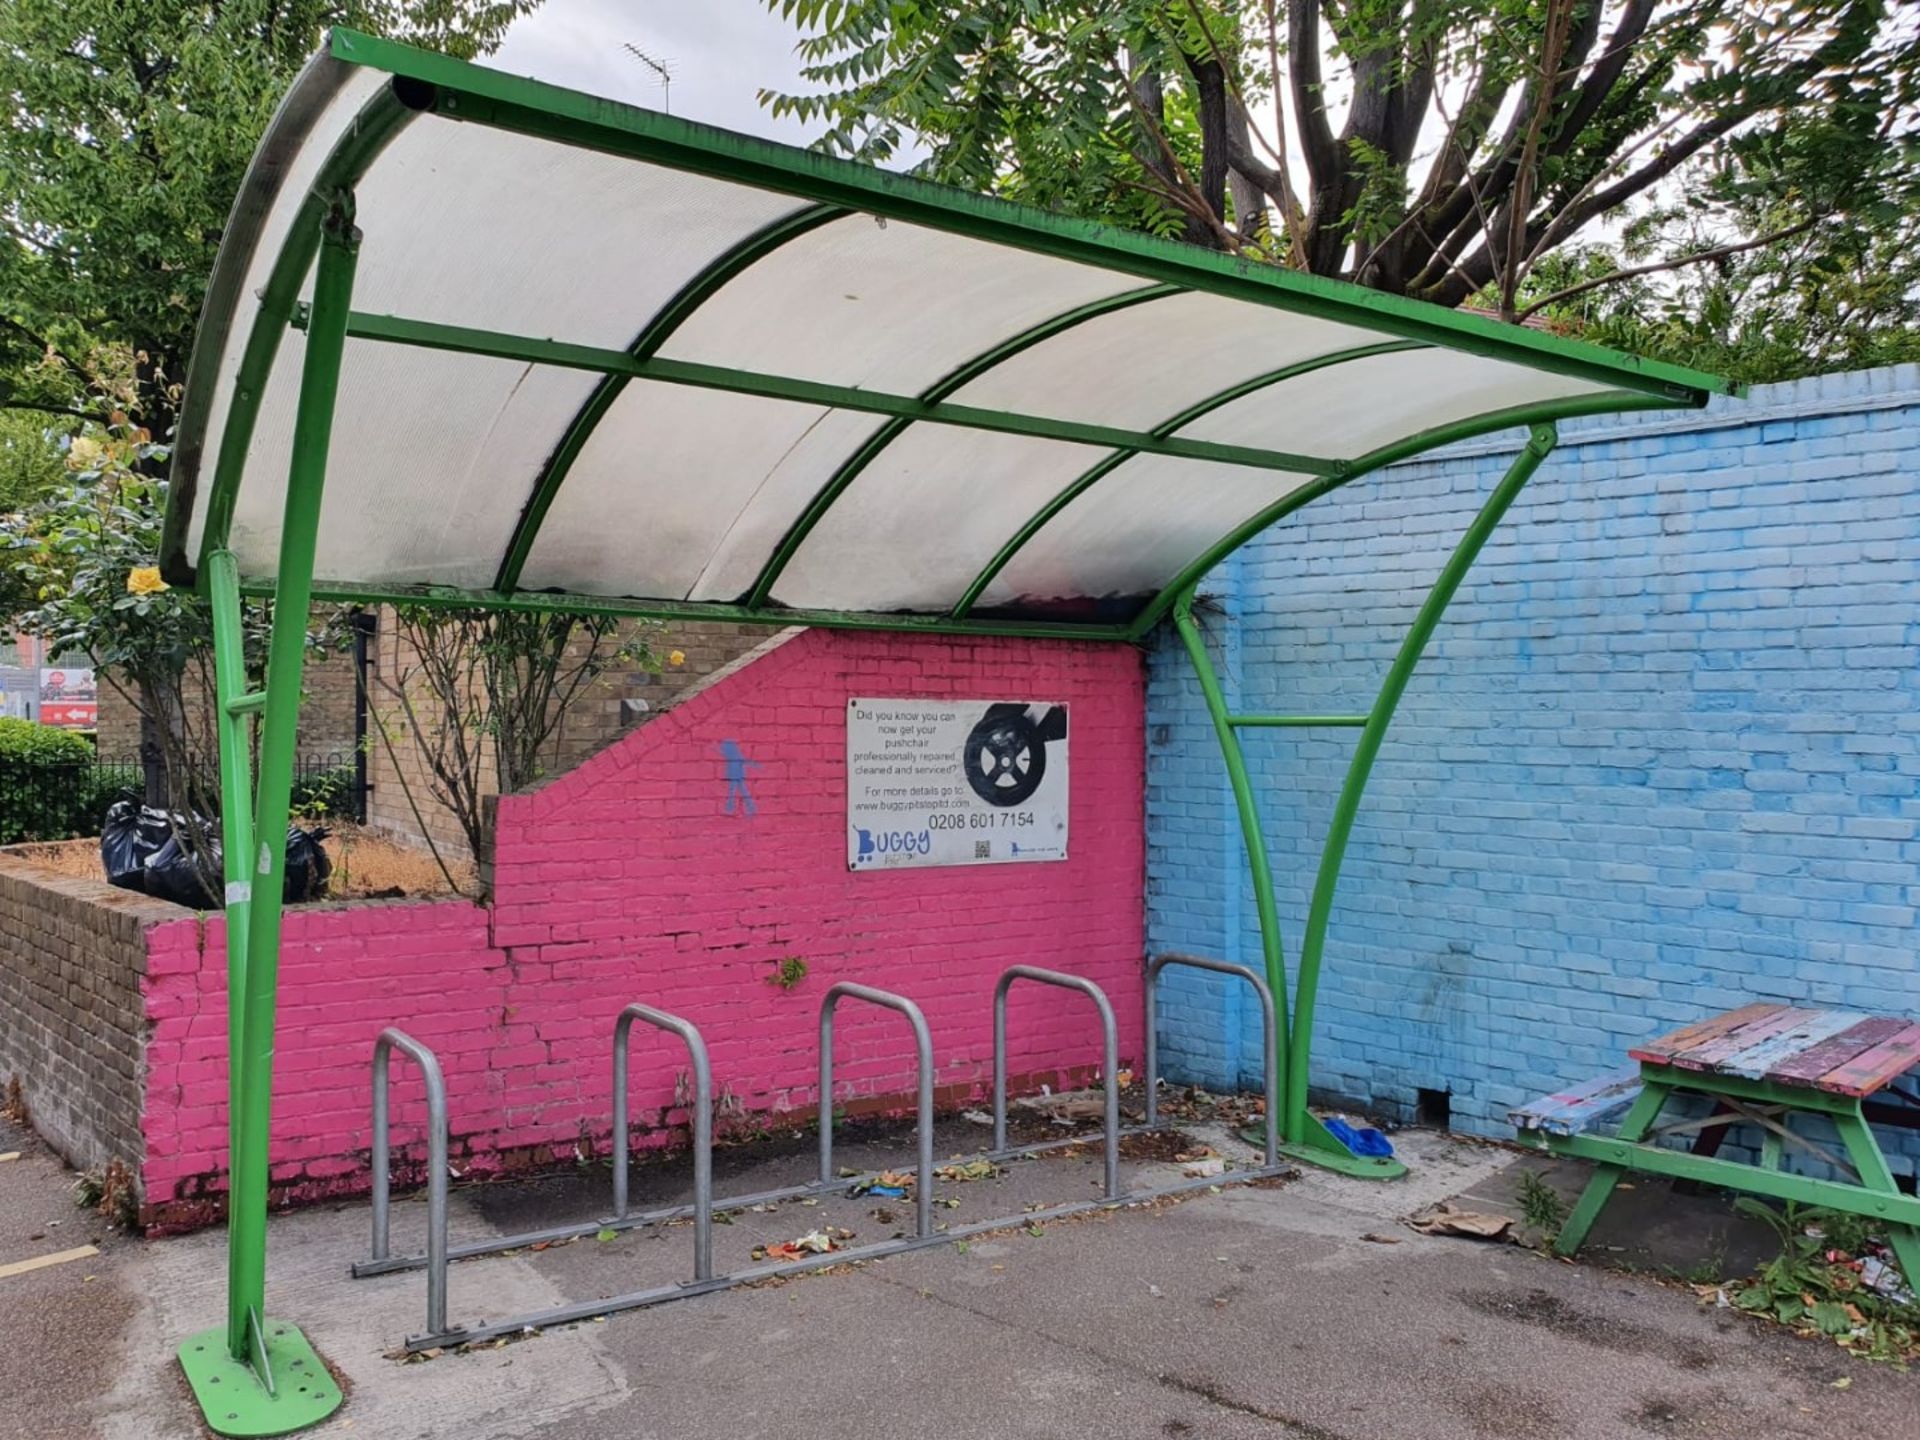 1 x Bike Shelter With Bike Racks - Suitable For Upto 8 Bikes - Contemporary Design - Suitable For